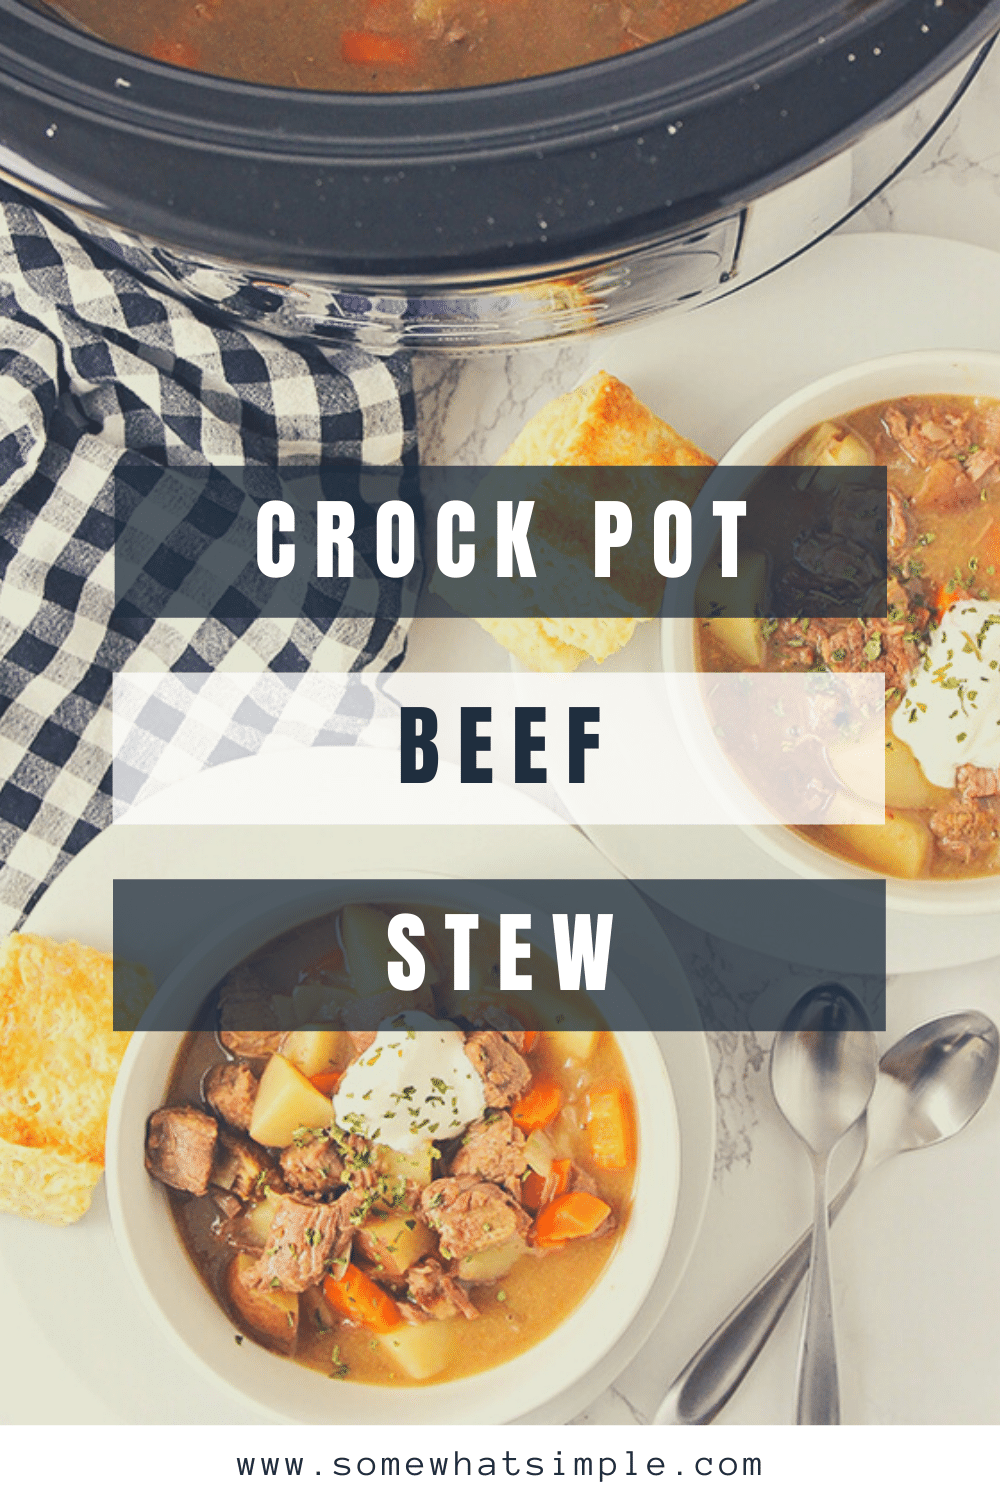 This crock pot beef stew is a savory recipe that is the perfect comfort-food meal.  Made in a slow cooker all day until the beef is incredibly tender and hearty vegetables are bursting with flavor! This dinner recipe is so easy to make, you can enjoy it all year long! via @somewhatsimple